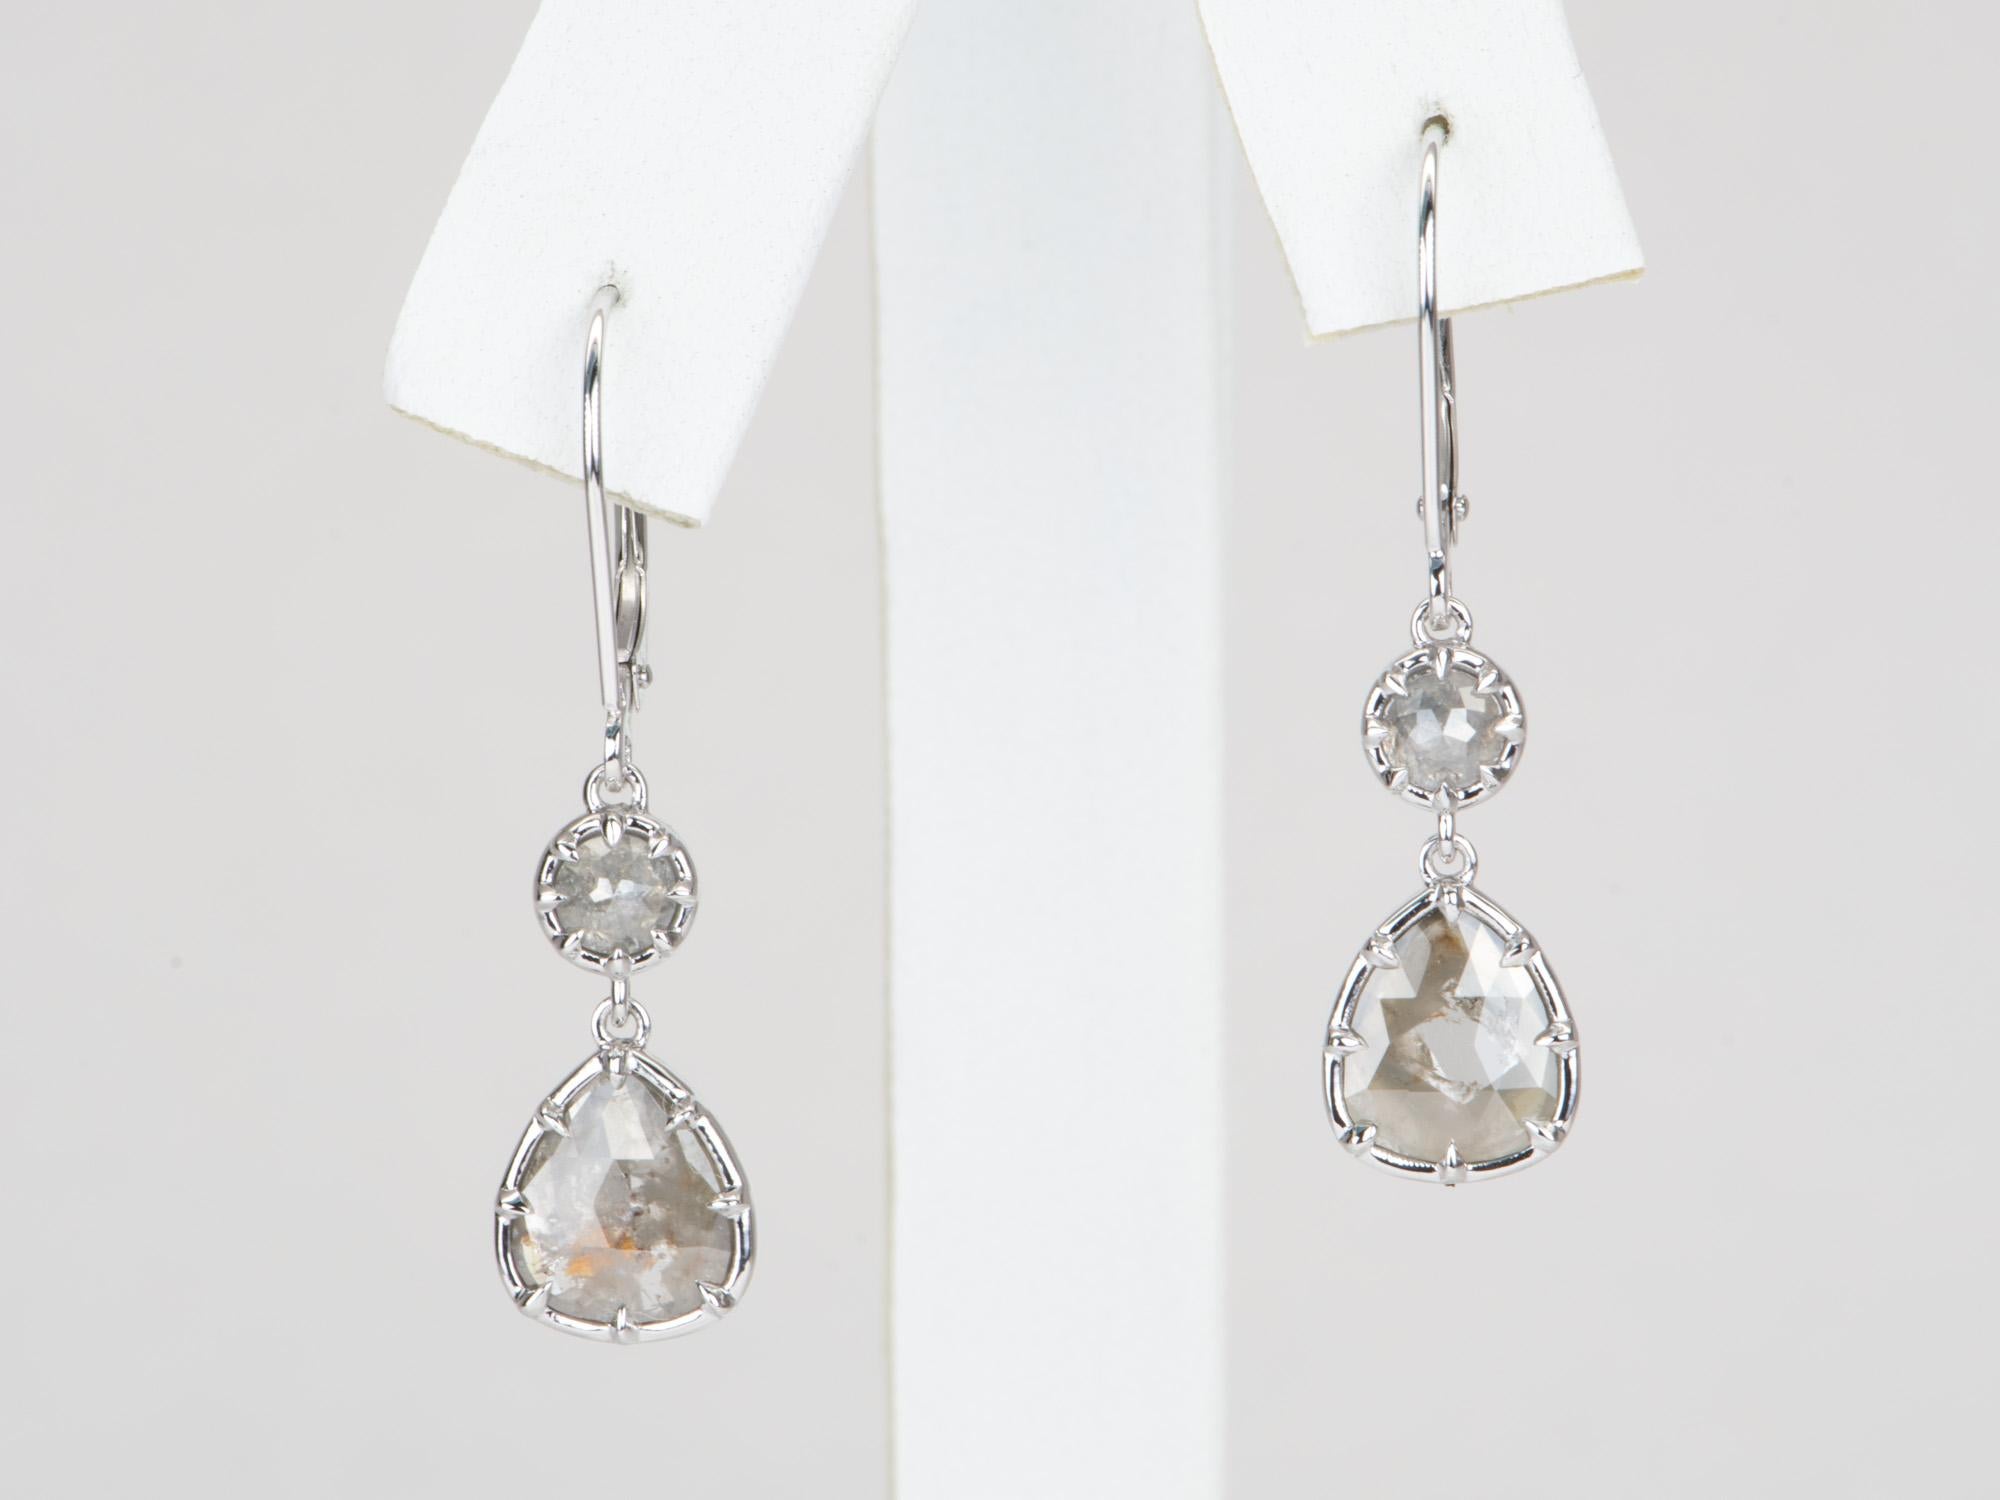 Exquisite craftsmanship and timeless design combine in these elegant Georgian-inspired dangle earrings. Featuring sparkling rose cut diamonds and 14K white gold, these earrings radiate a regal beauty that will turn heads in any setting. The perfect